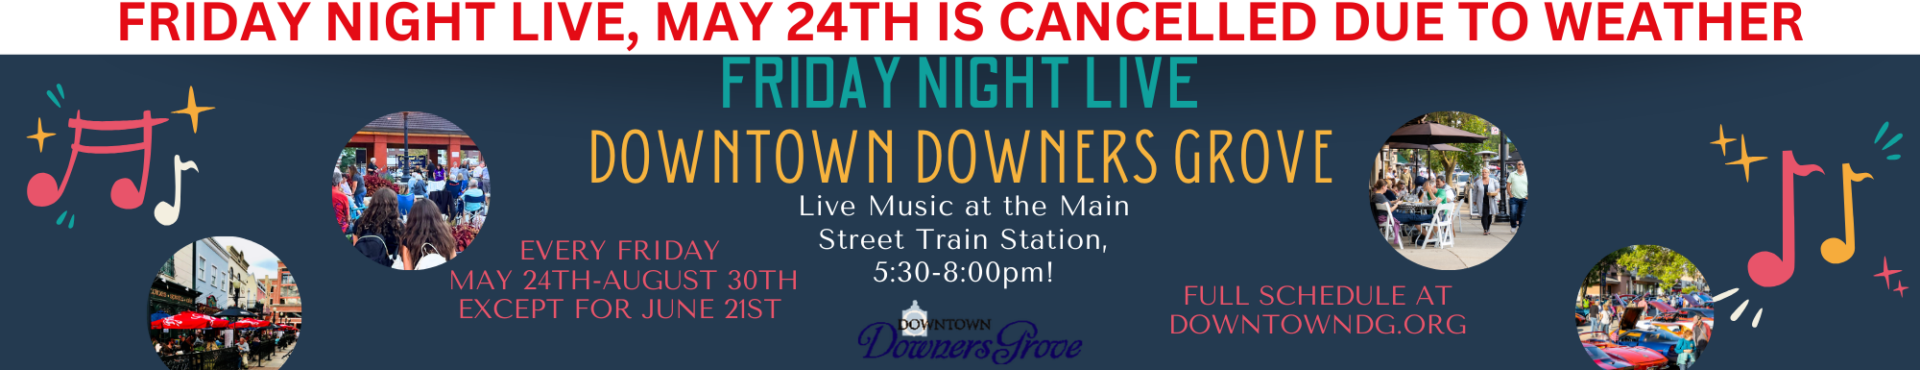 Friday Night Live Cancelled